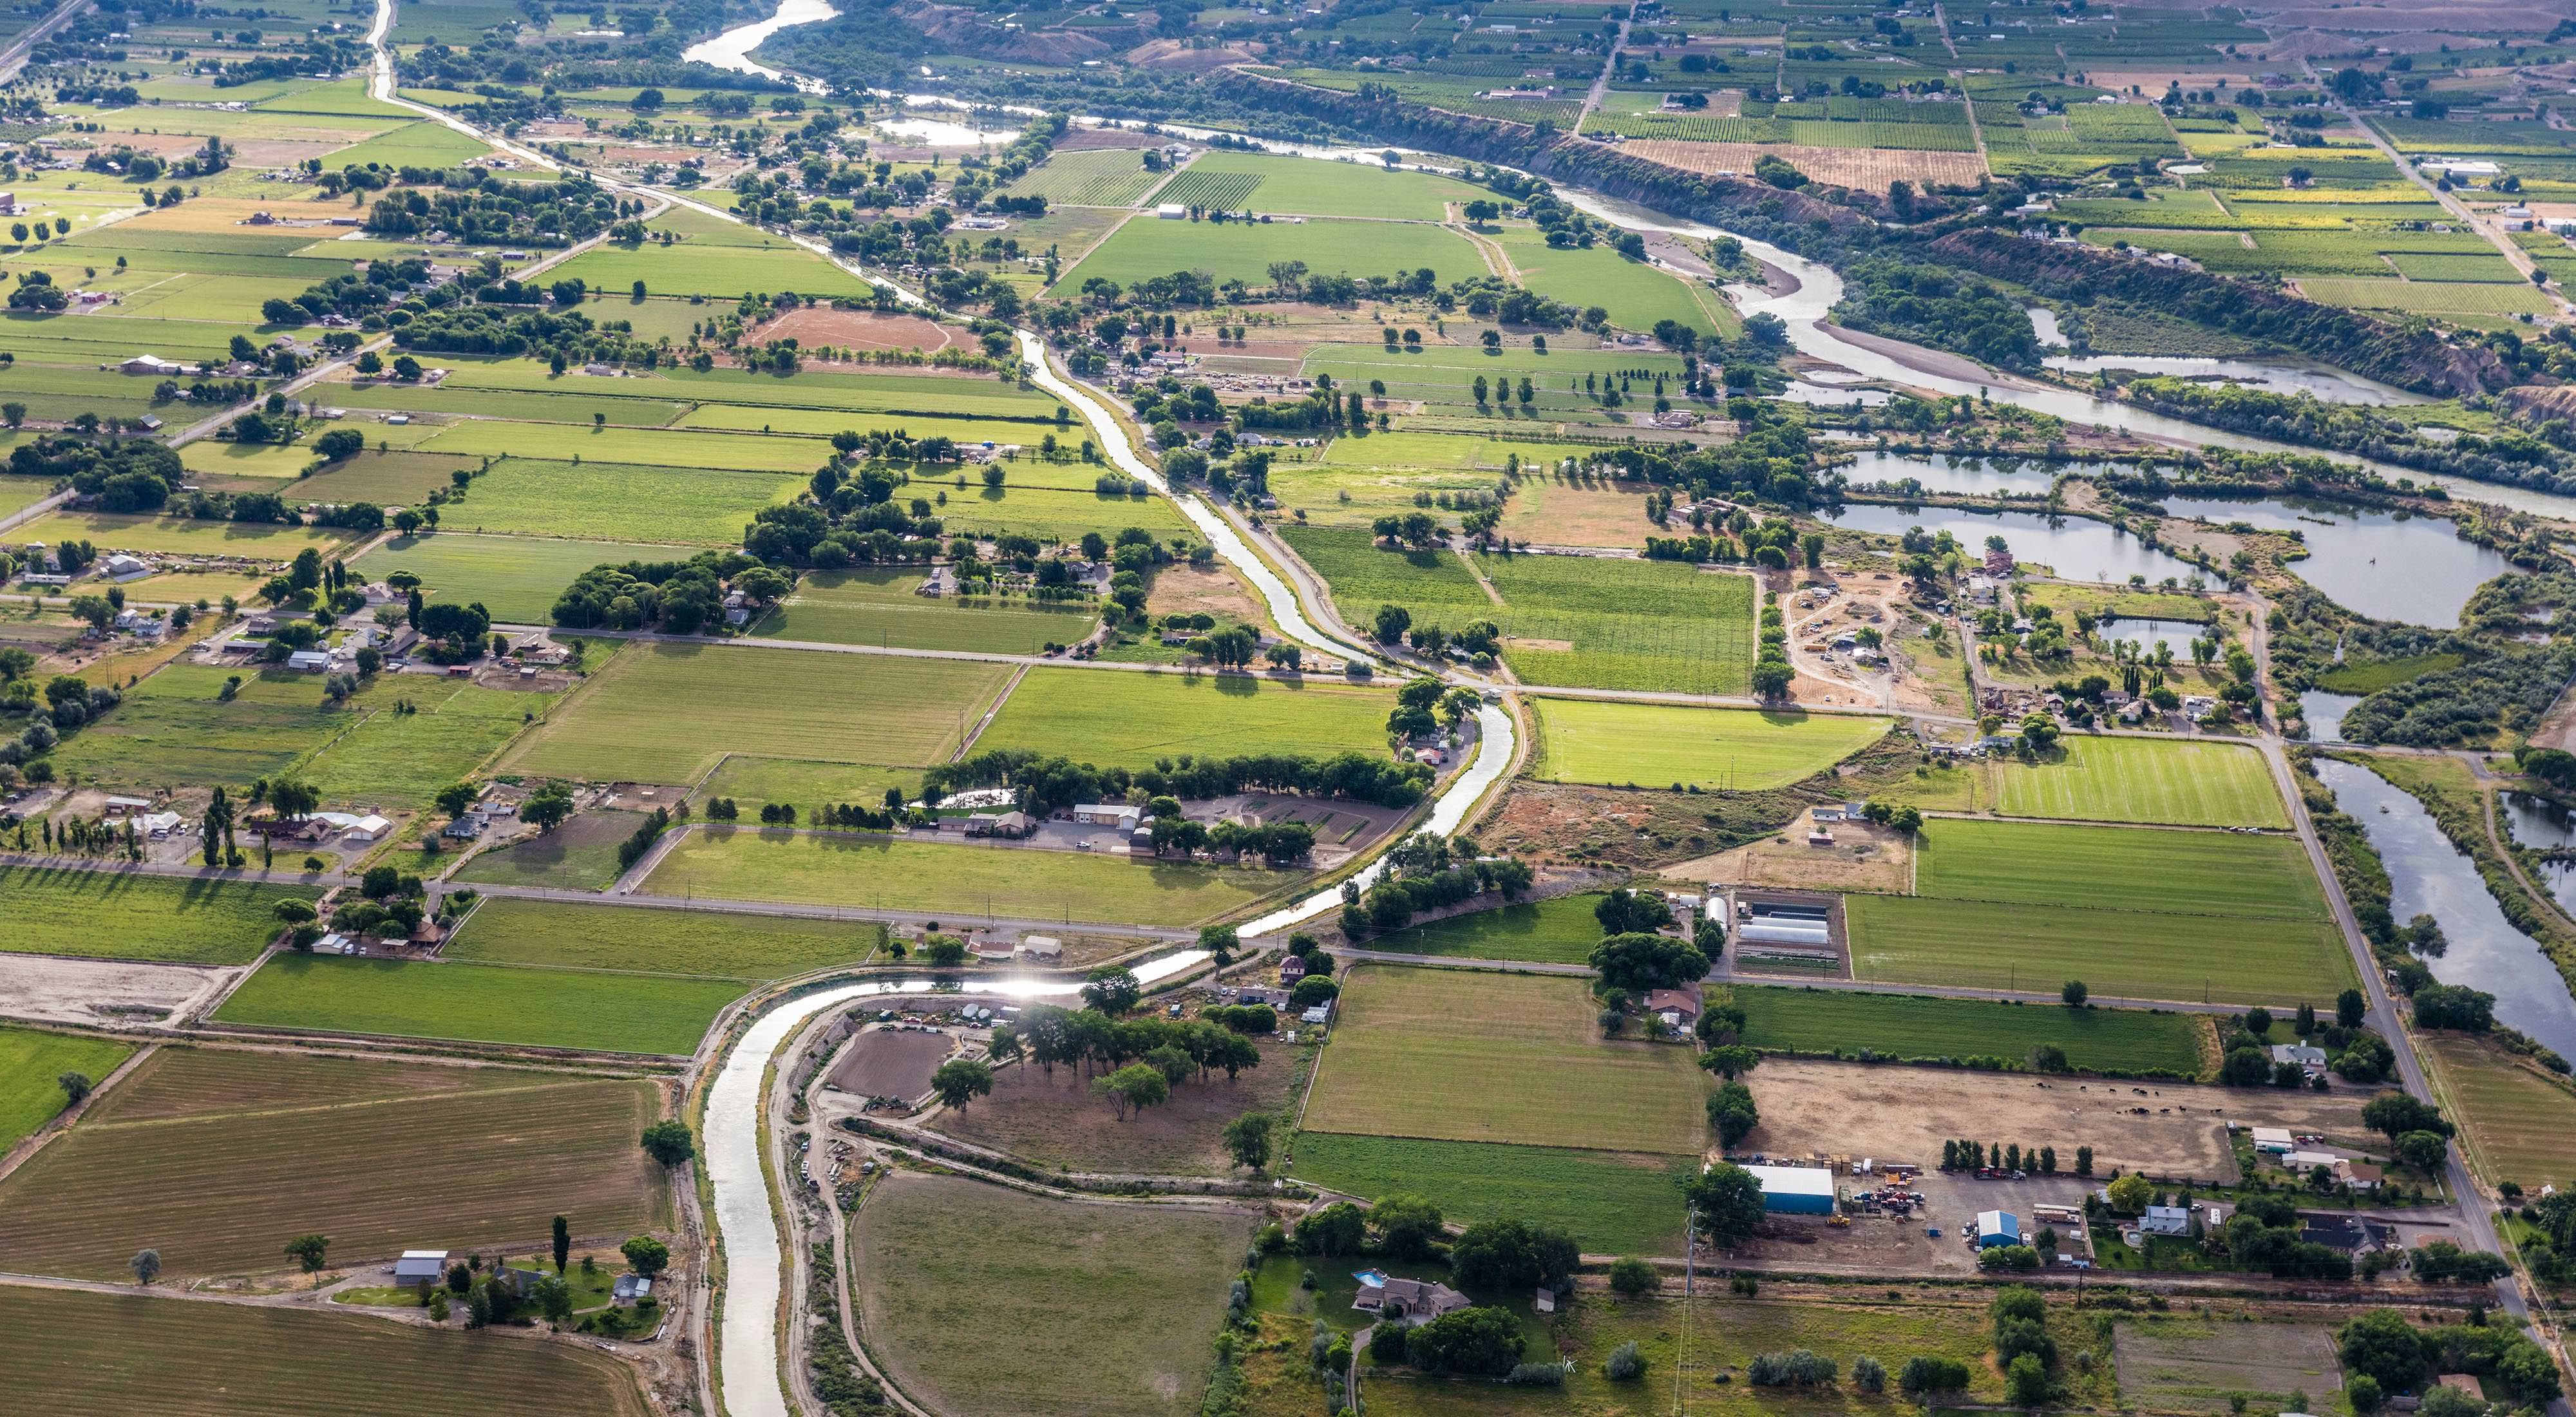 Aerial view of rivers passing through farm fields with a few trees and buildings.